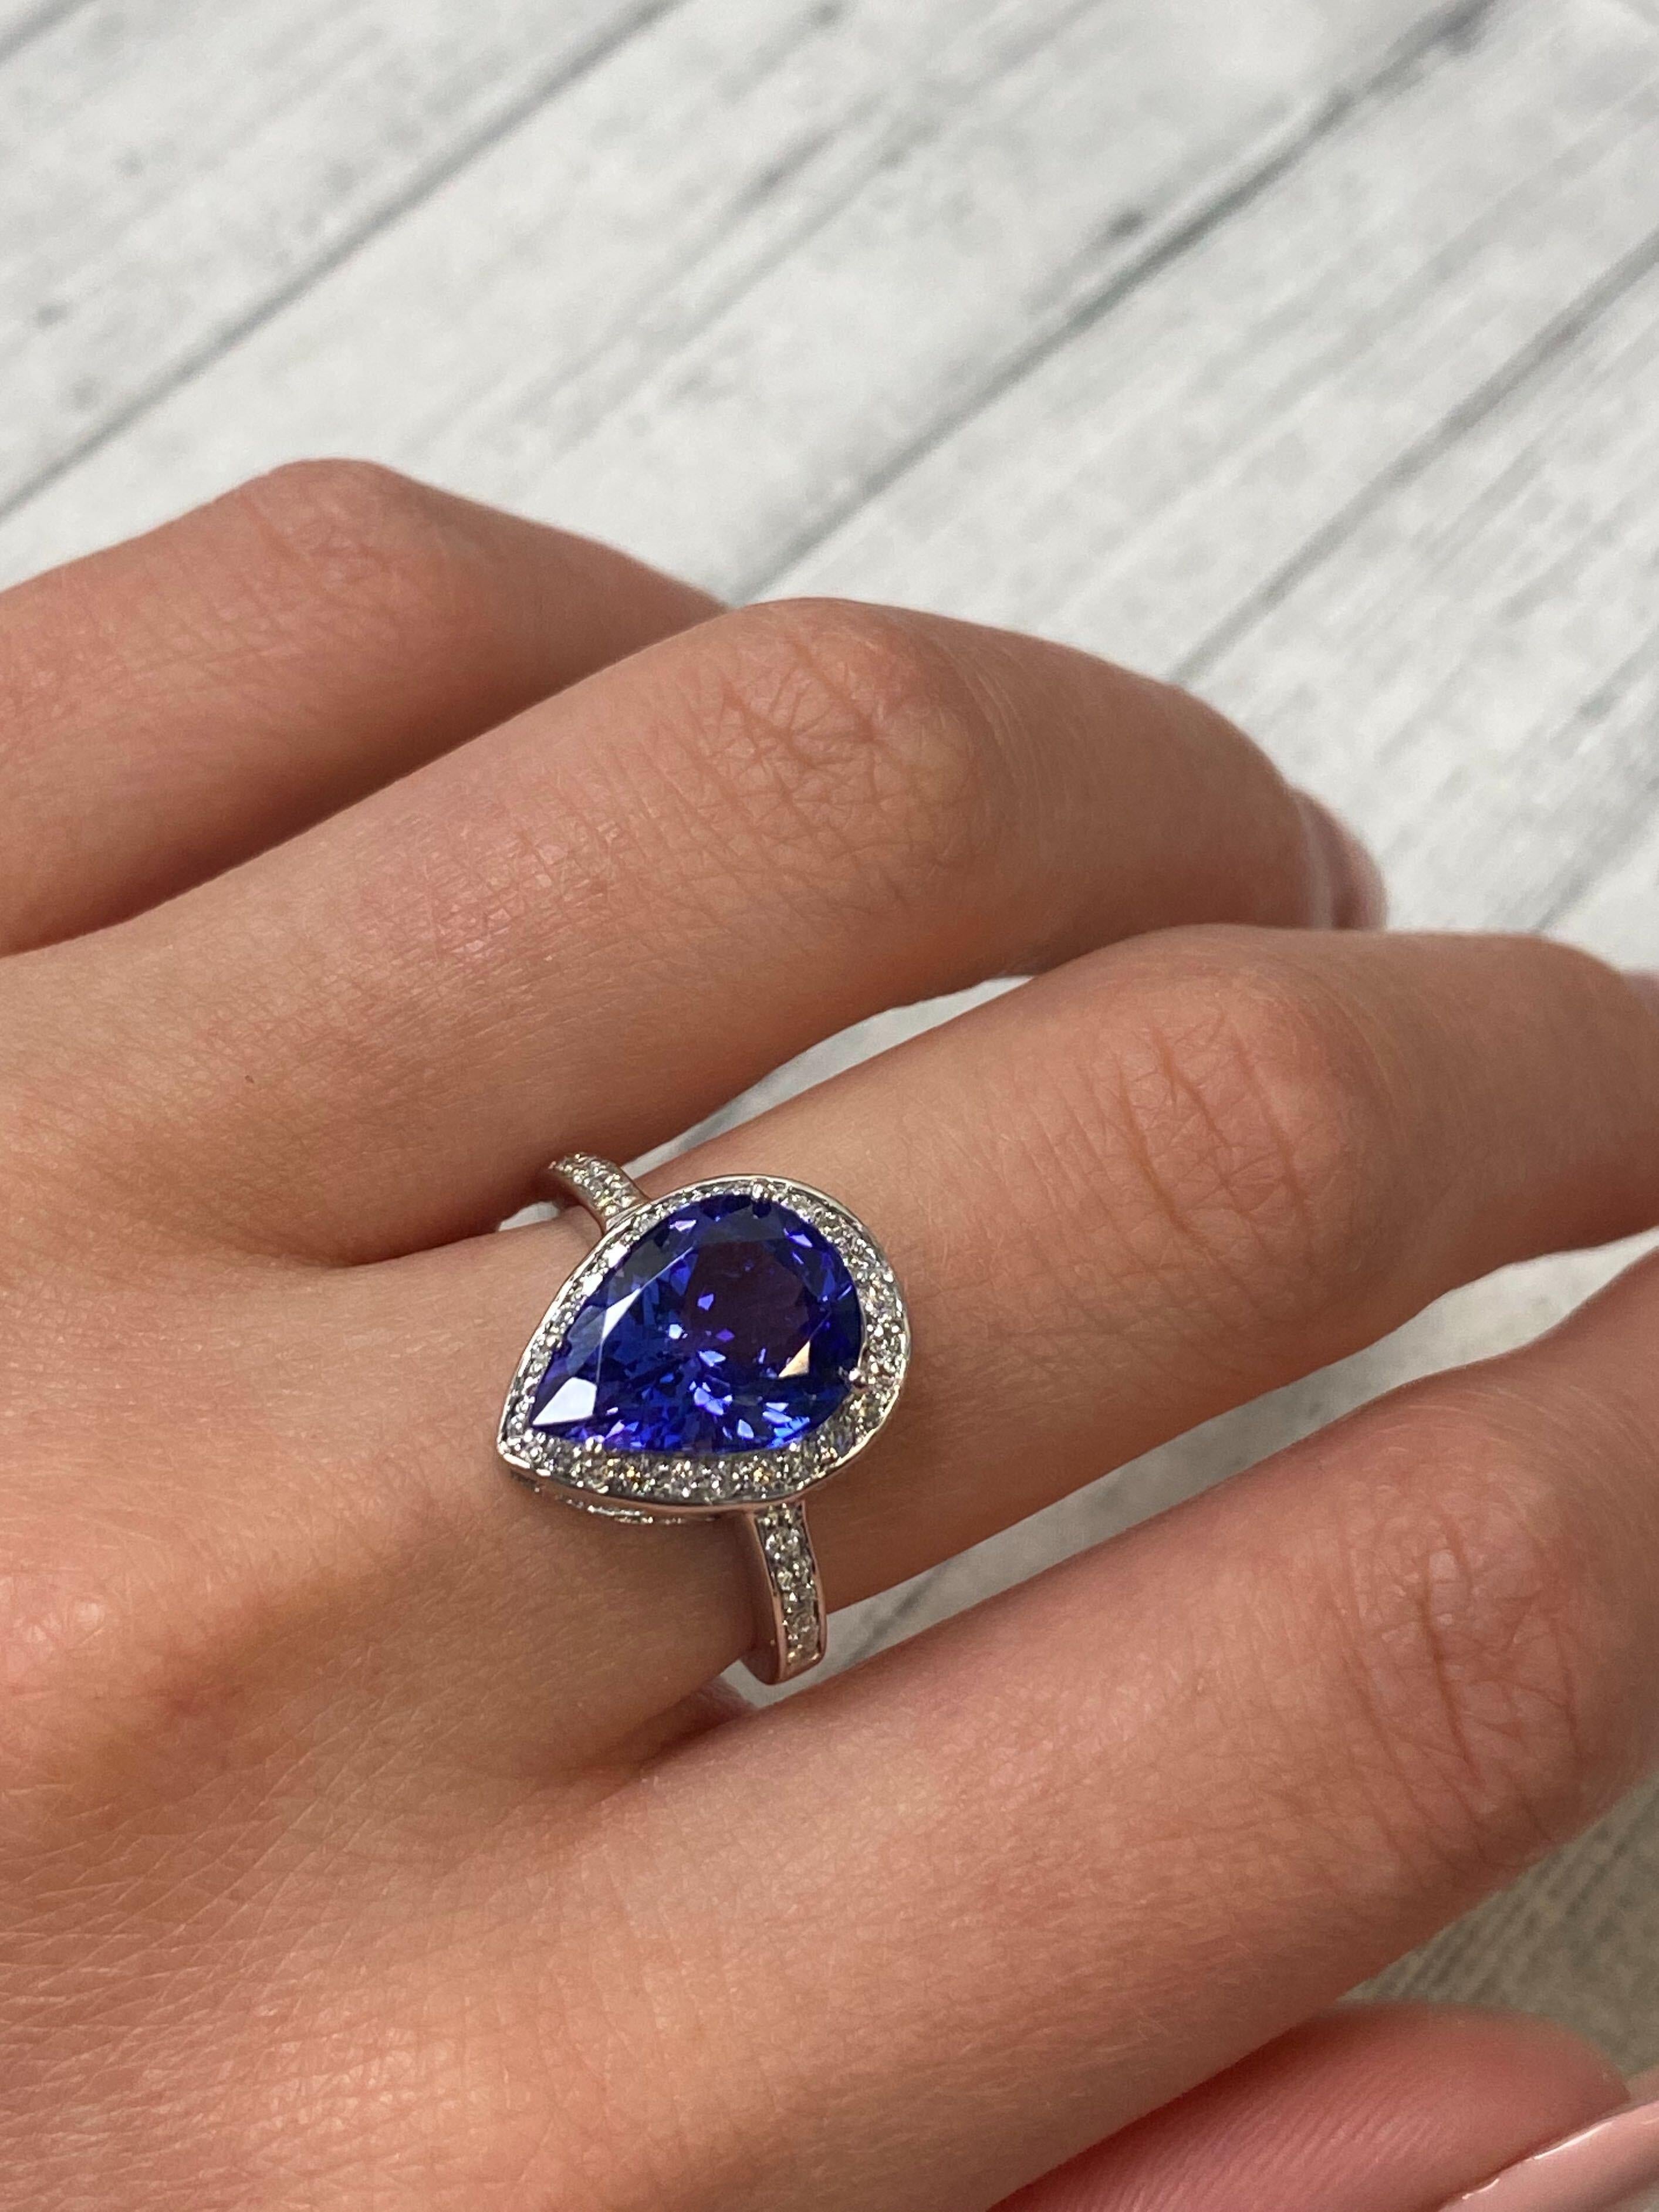 Rachel Koen Pear Shaped Tanzanite & Diamonds Ring 14K White Gold In New Condition For Sale In New York, NY